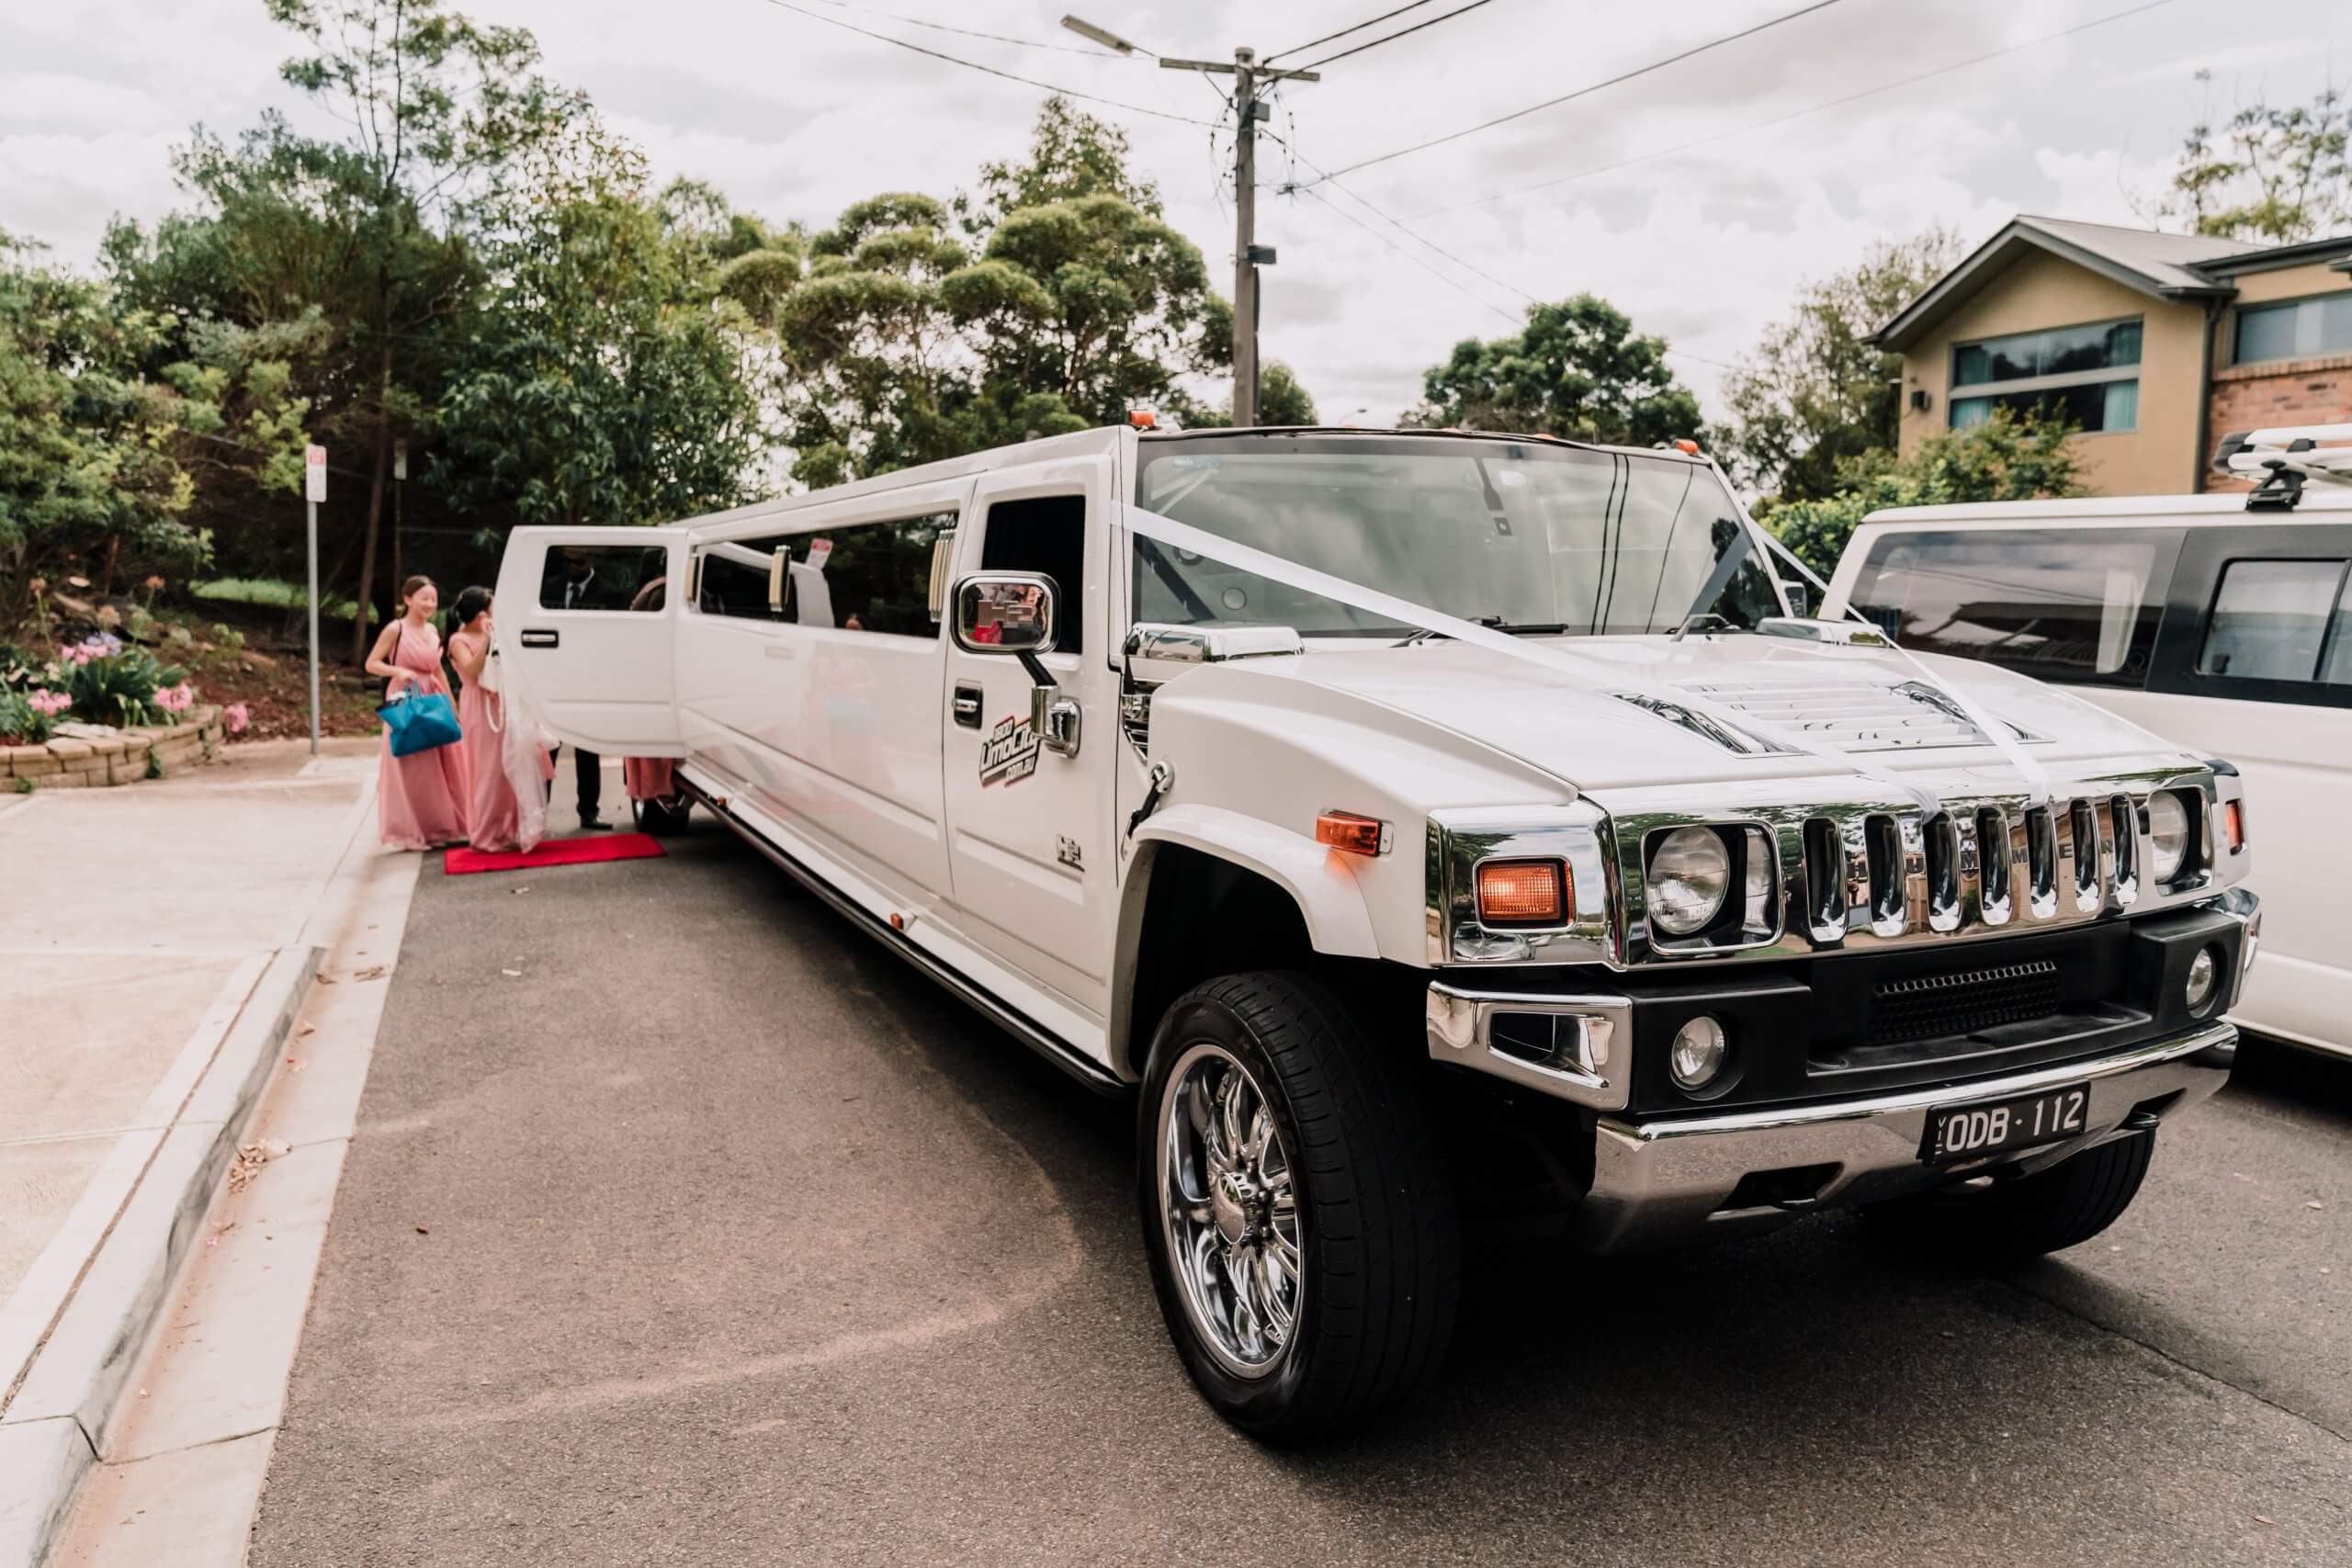 This white hummer limousine was the couples choice for their wedding car. Captured by Black Avenue Productions